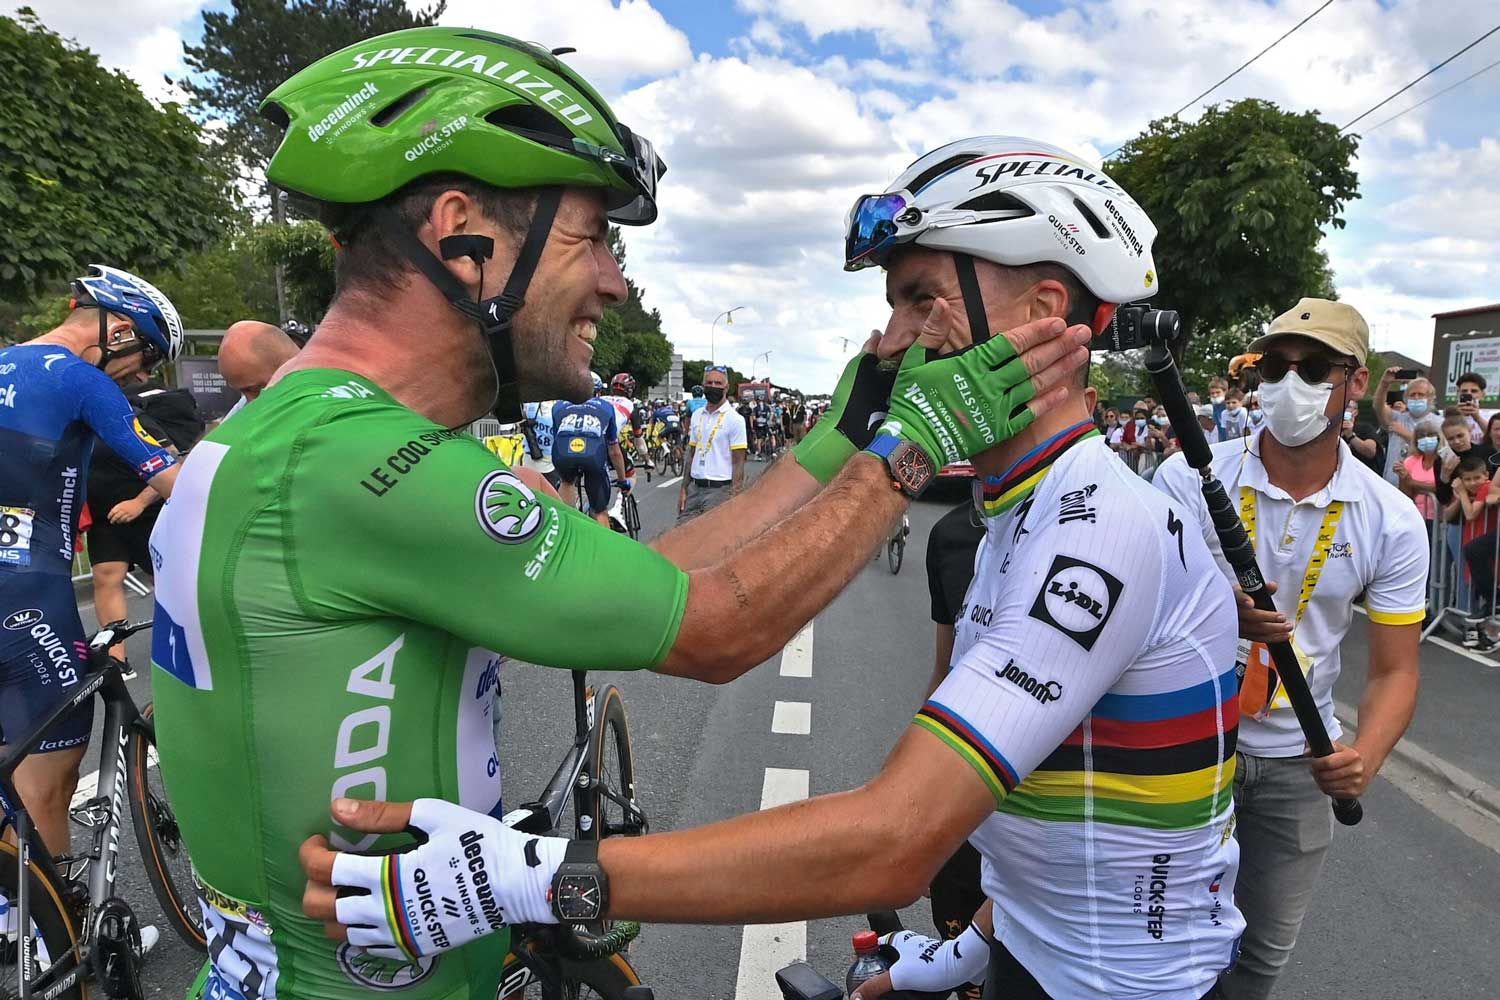 Britain’s Mark Cavendish, wearing the best sprinter’s green, celebrates with France’s Julian Alaphilippe after winning the sixth stage of the Tour de France cycling race over 160.6 kilometers (99.8 miles) with start in Tours and finish in Chateauroux, France, Thursday, July 1, 2021. (David Stockman, Pool Photo via AP